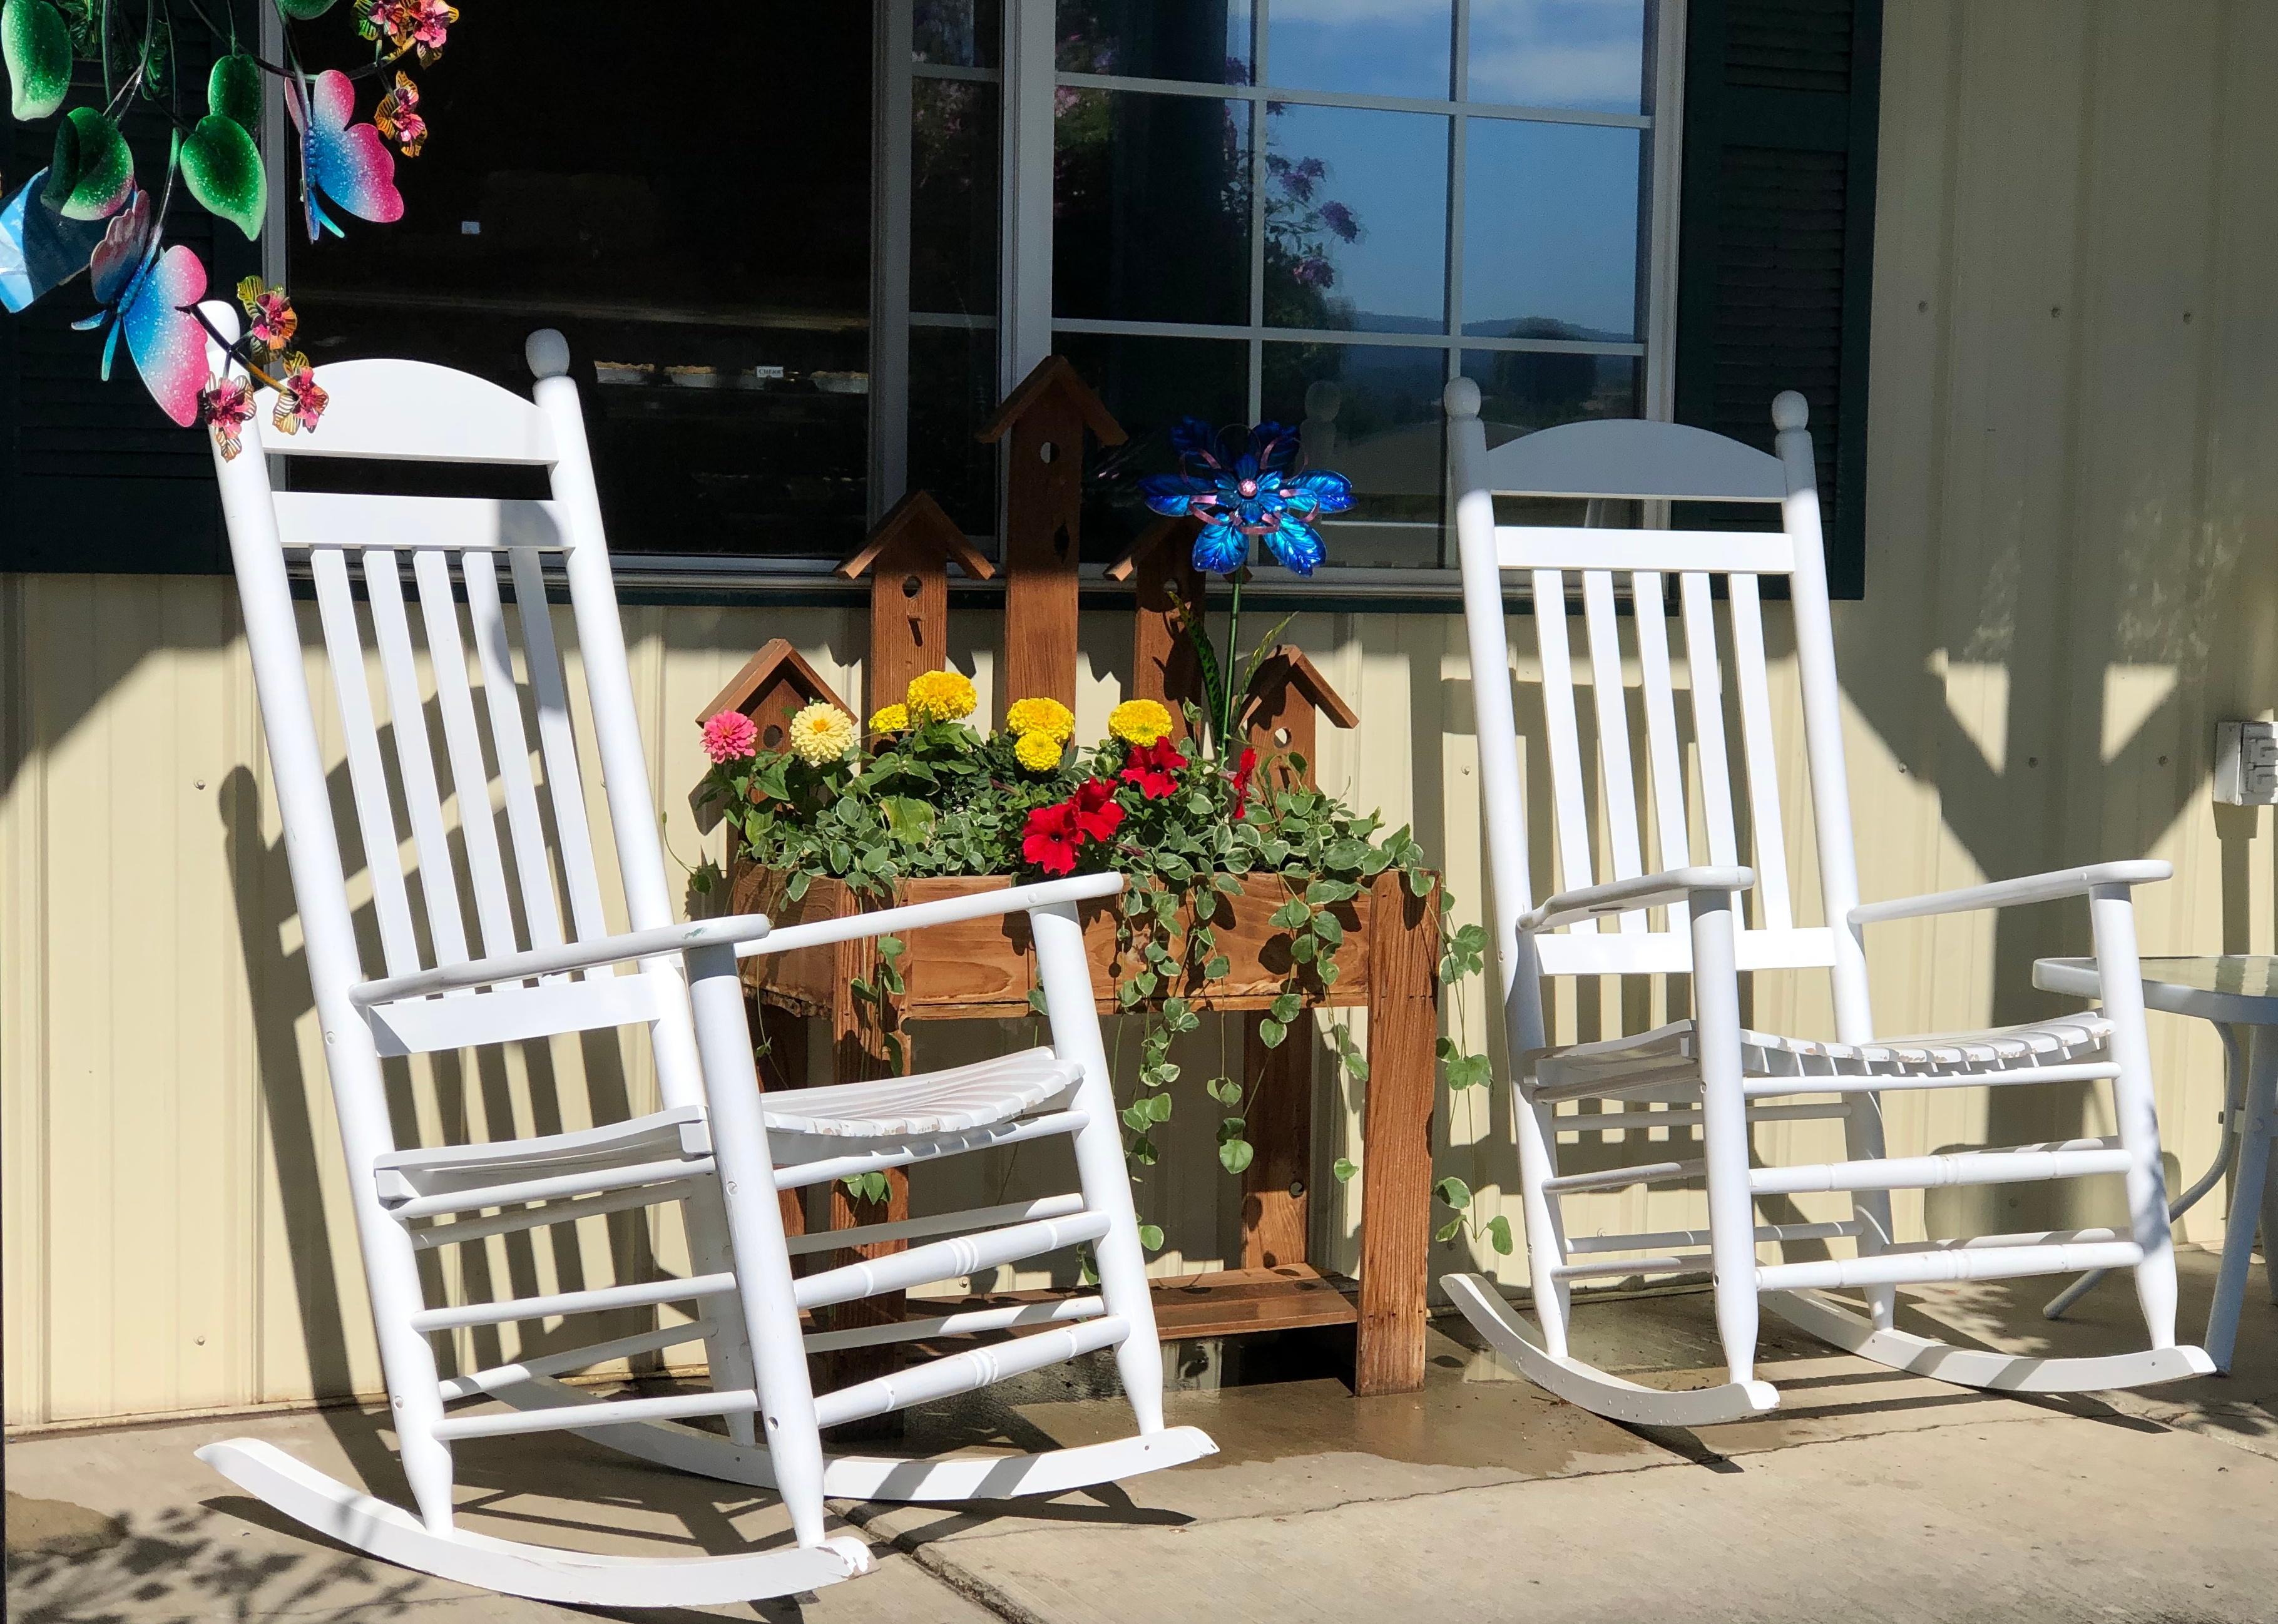 Front porch seating with white rocking chairs and fresh flowers.